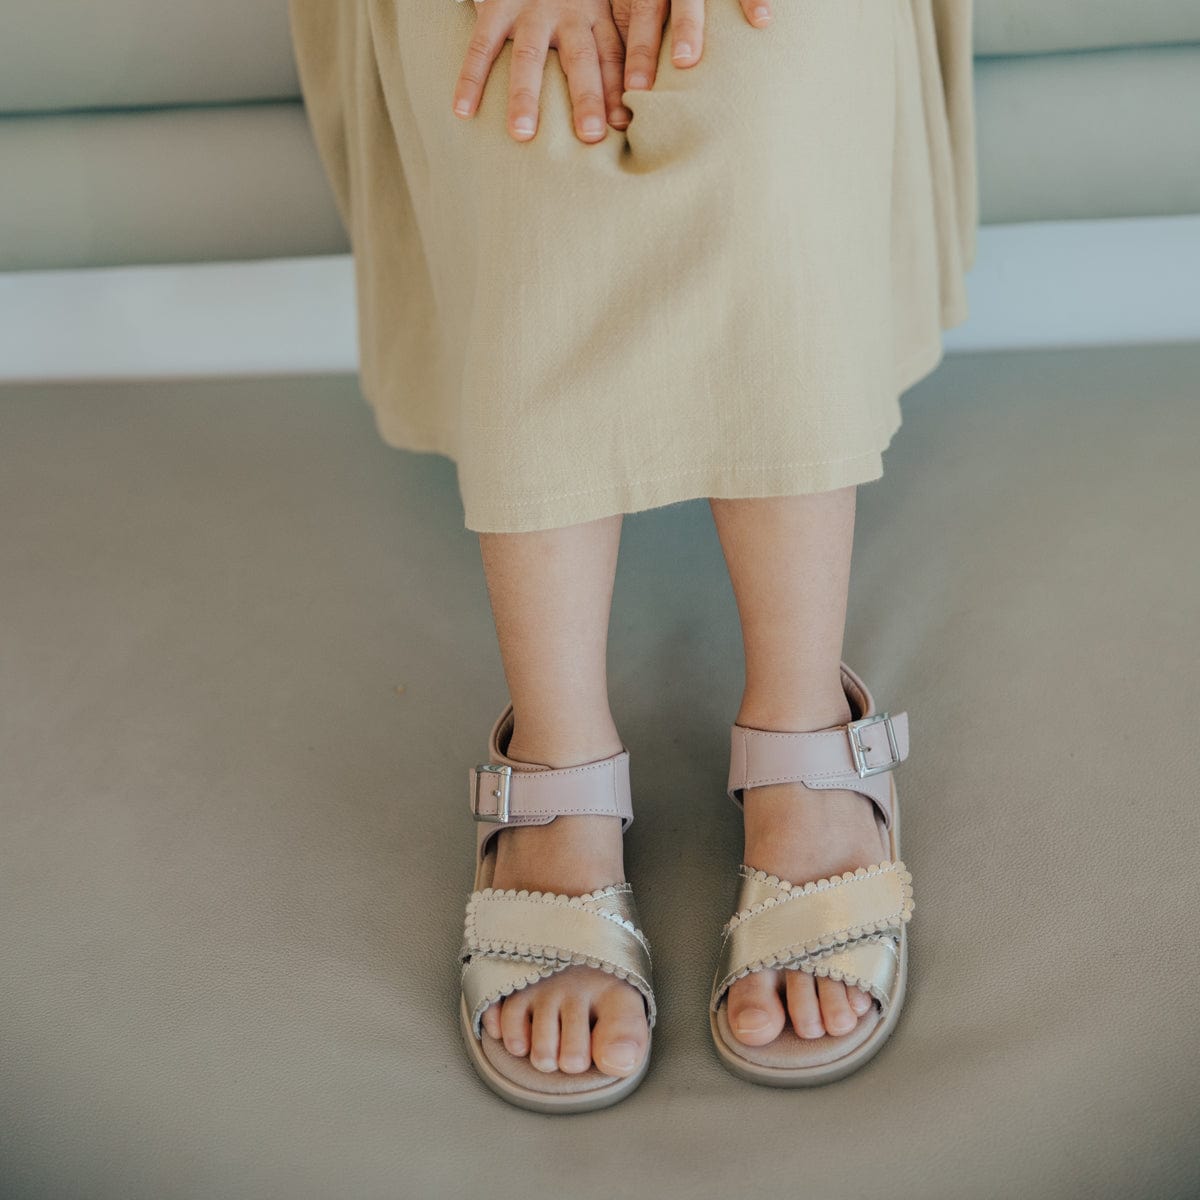 Pretty Brave Girls Shoes Willow Sandal in Blush/Gold